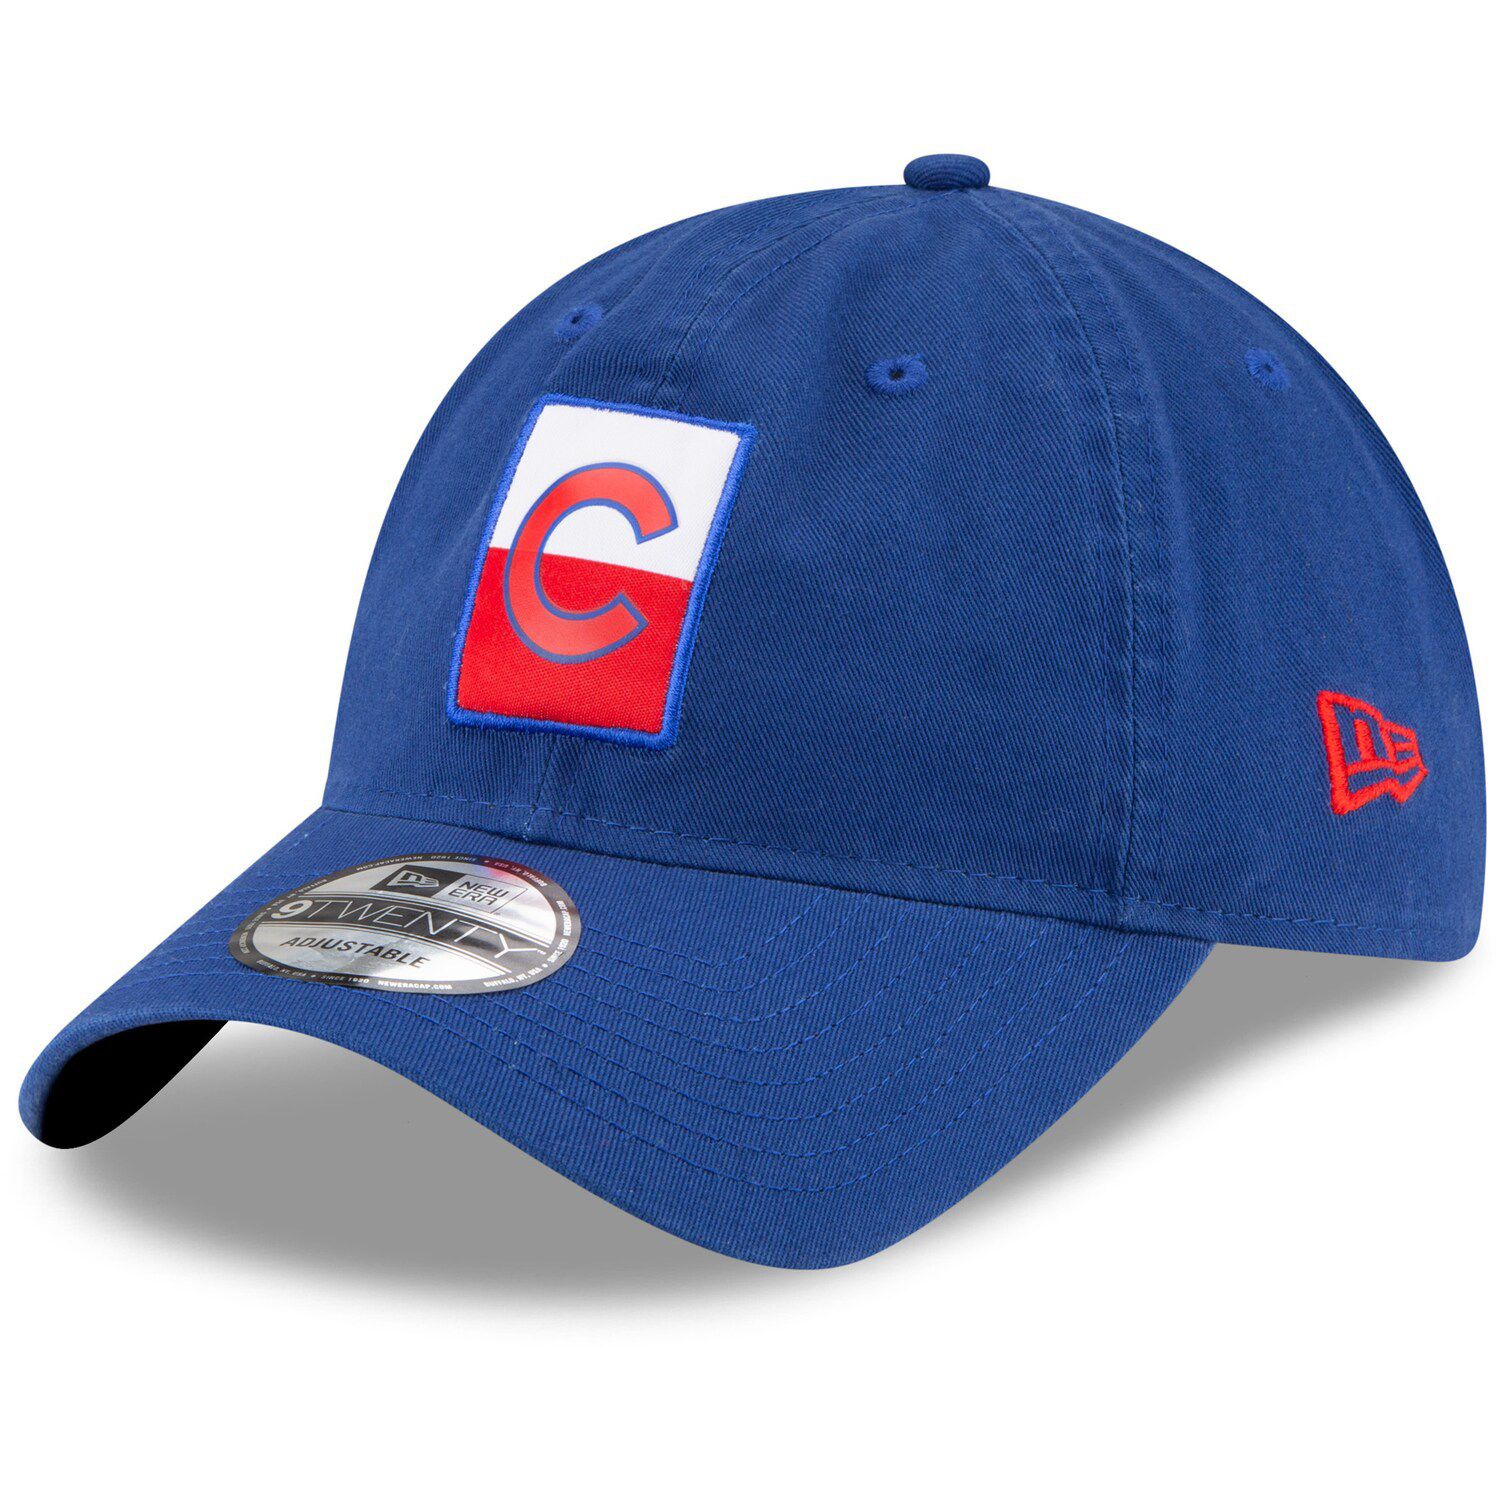 Nike Men's Nike Royal Chicago Cubs Cooperstown Collection Heritage86  Adjustable Hat